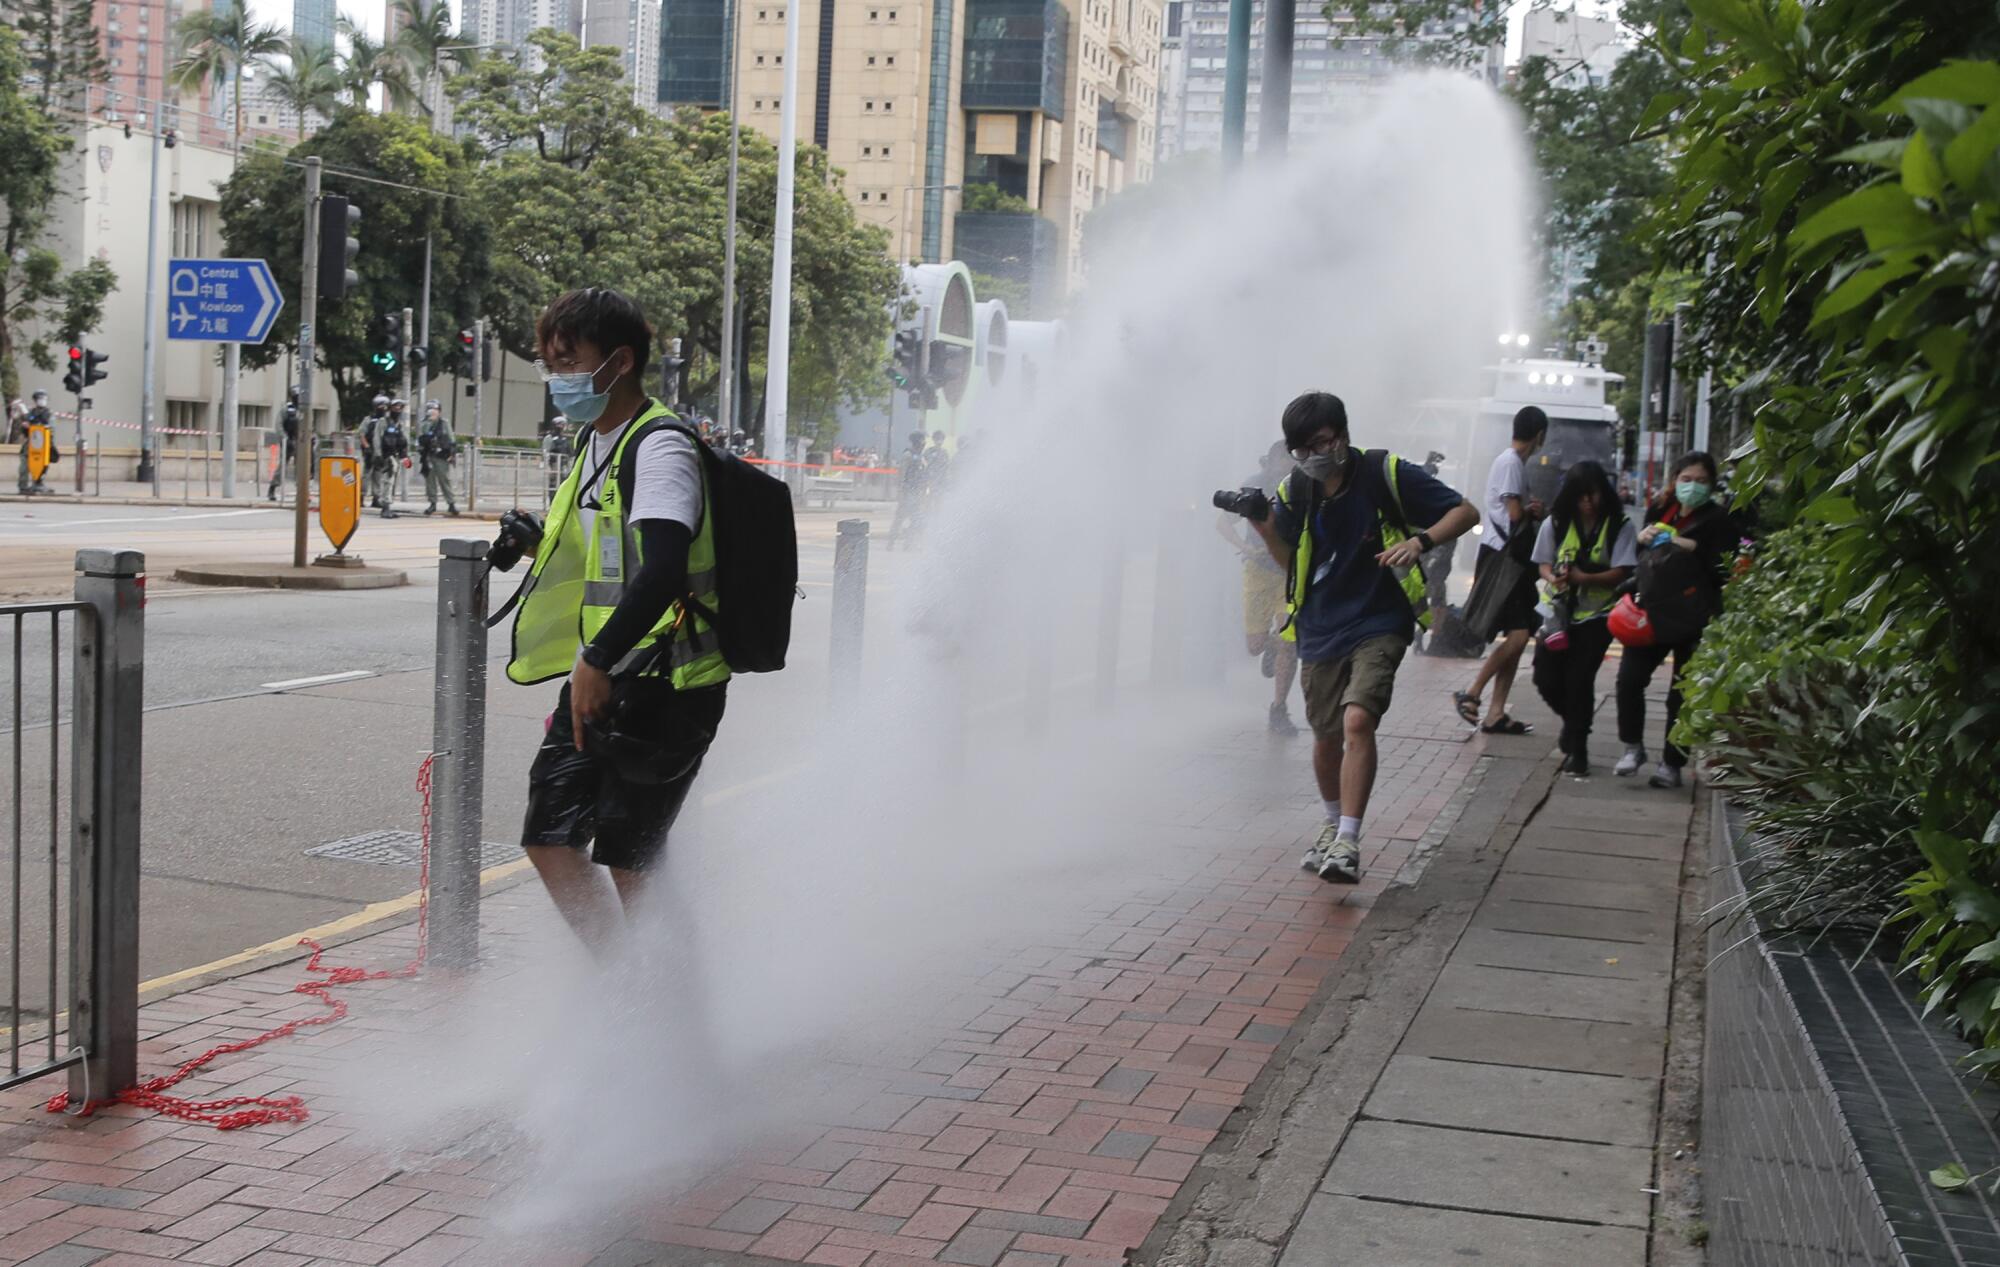 Journalists run as police fire water cannons during a demonstration against the new national security law in Hong Kong.